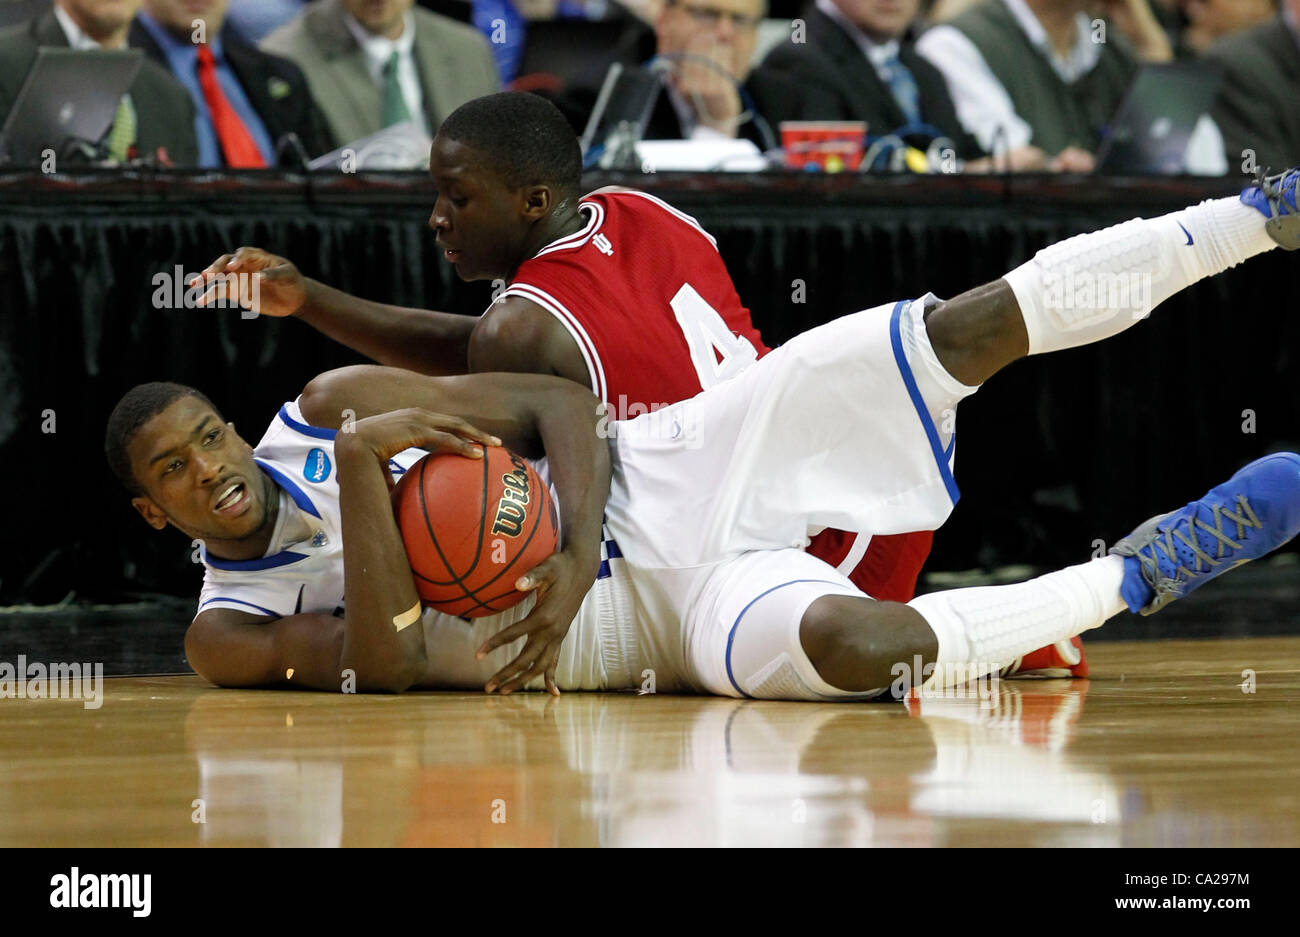 March 24, 2012 - Atlanta, Georgia, U.S. - Kentucky Wildcats forward MICHAEL KIDD-GILCHRIST (14) came up with a loose ball and called timeout with Indiana Hoosiers guard VICTOR OLADIPO (4) on his back as the University of Kentucky played Indiana University in the NCAA South Regional semifinal the Geo Stock Photo